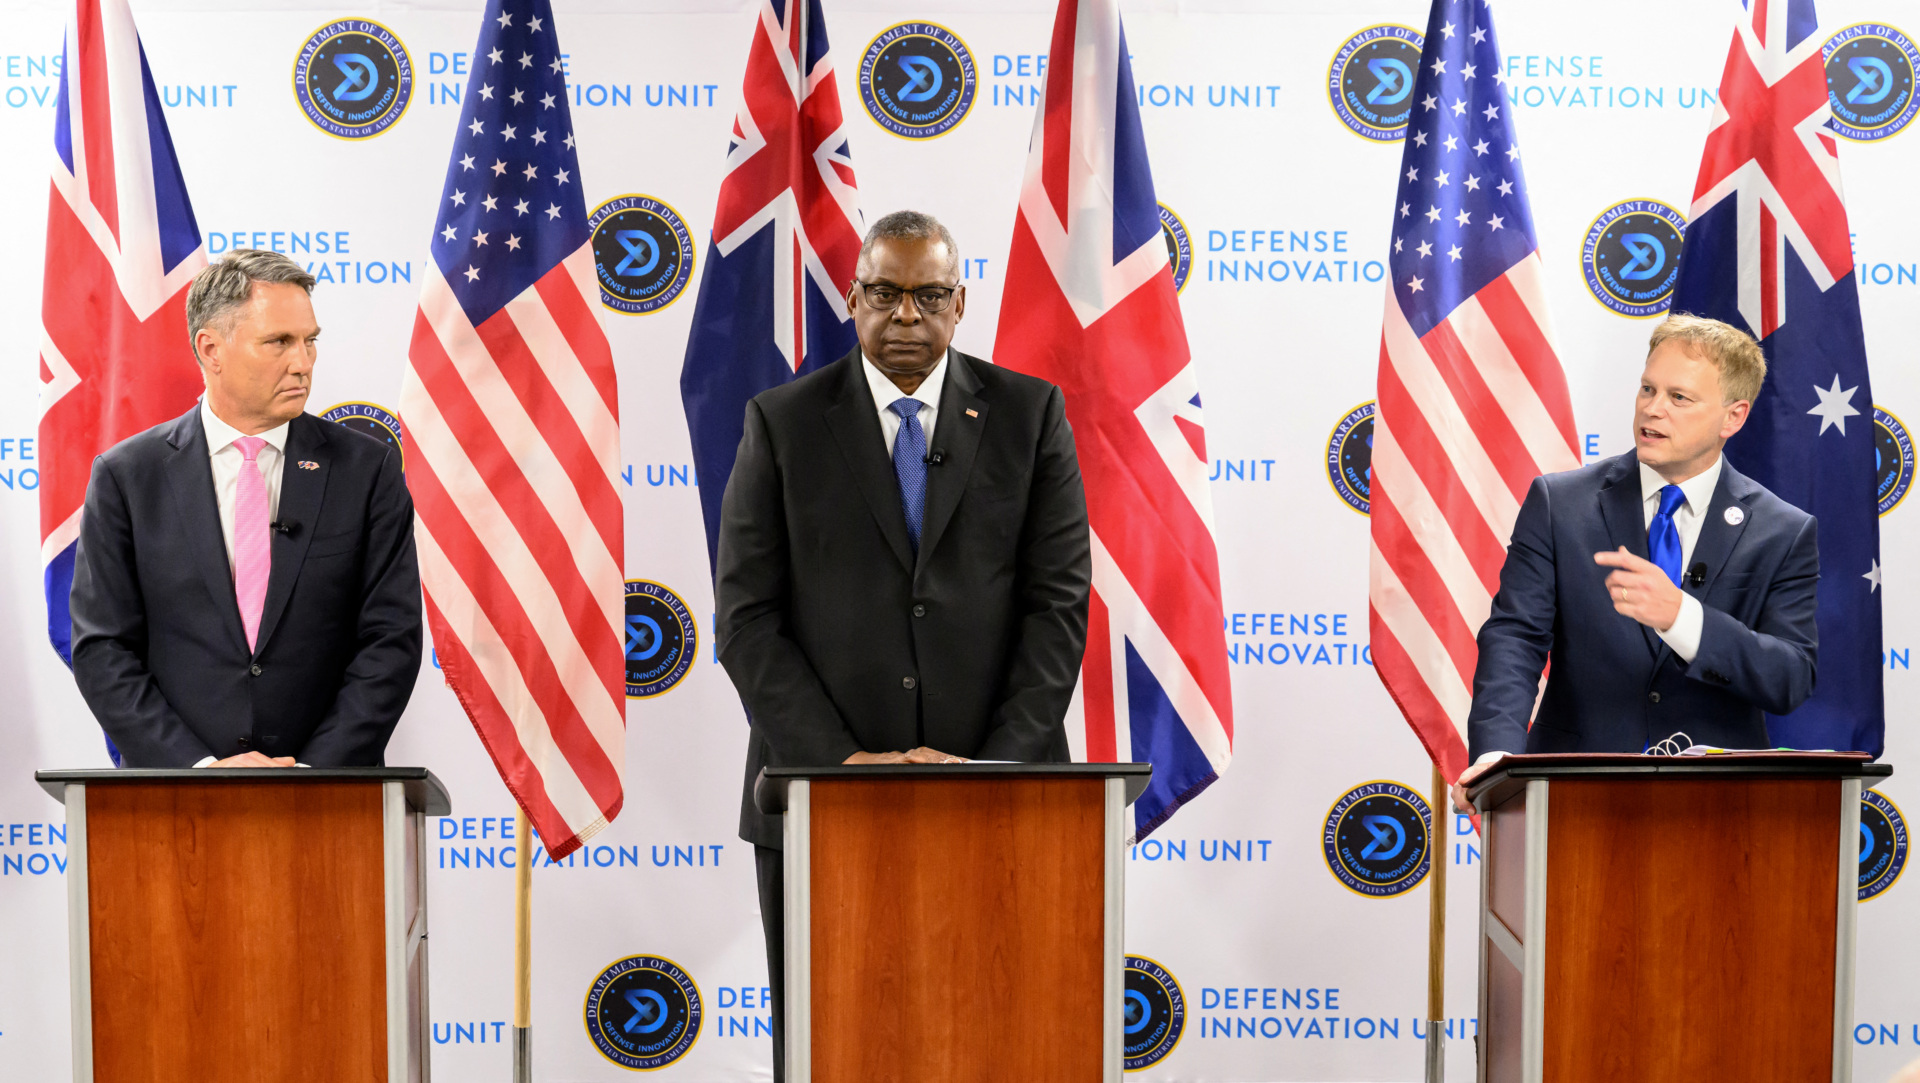 TOPSHOT - (From L) Australian Deputy Prime Minister and Defense Minister Richard Marles, US Defense Secretary Lloyd Austin and British Defense Secretary Grant Shapps hold a press conference during the AUKUS Defense Ministerial Meeting in Mountain View, California, on December 1, 2023. (Photo by JOSH EDELSON / AFP) (Photo by JOSH EDELSON/AFP via Getty Images)